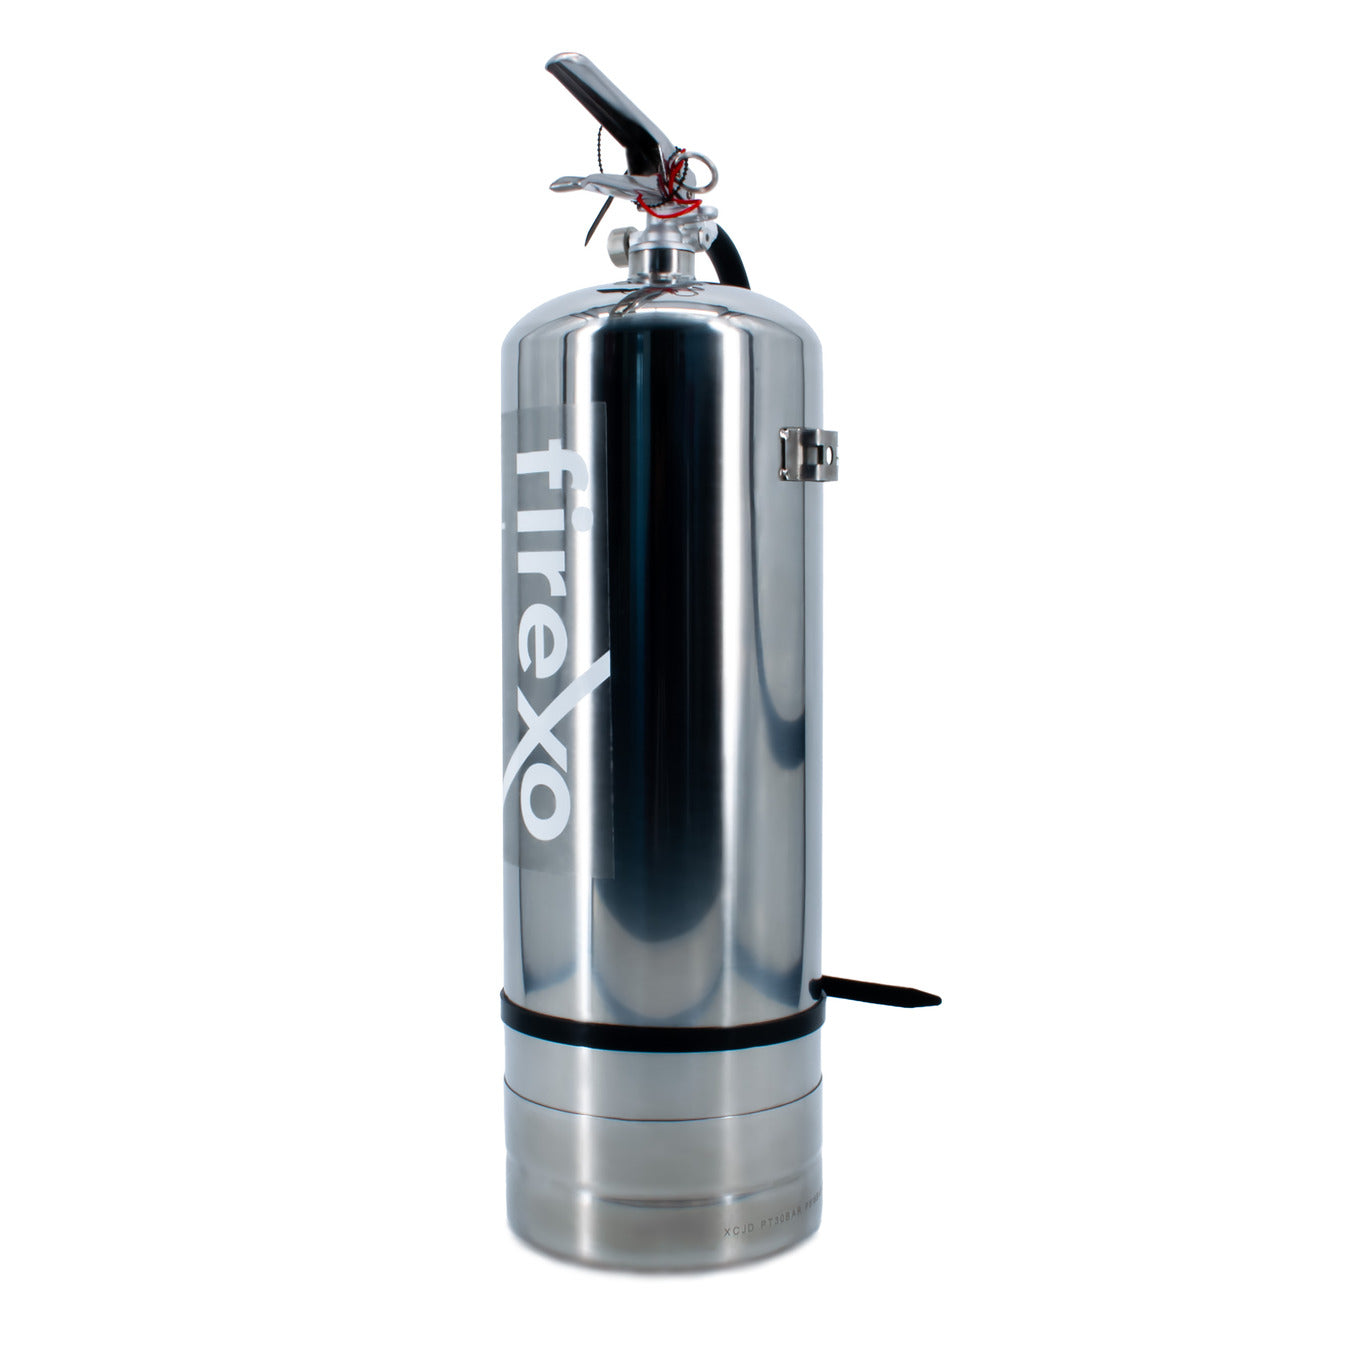 Firexo Stainless Steel 9 Litre Fire Extinguisher